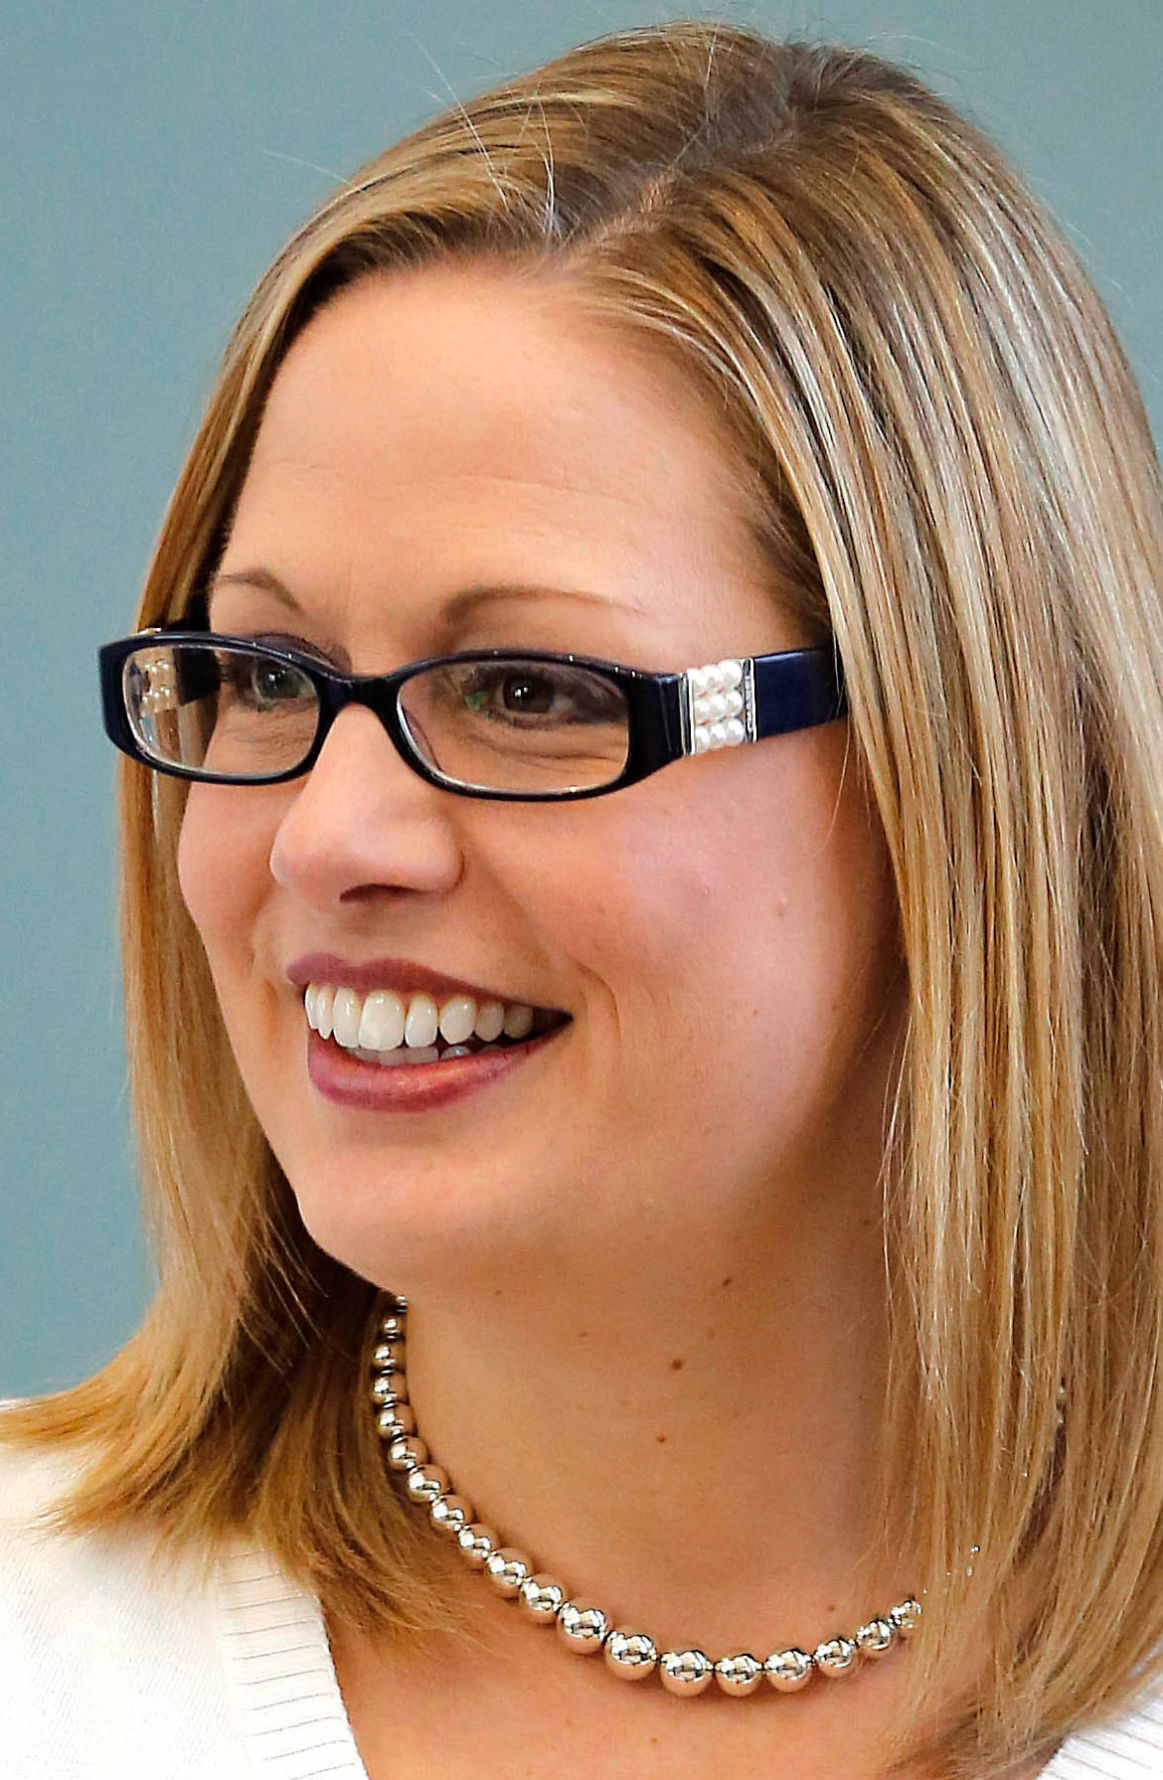 Kyrsten Sinema: Tax season brings out scammers | Local opinion | tucson.com